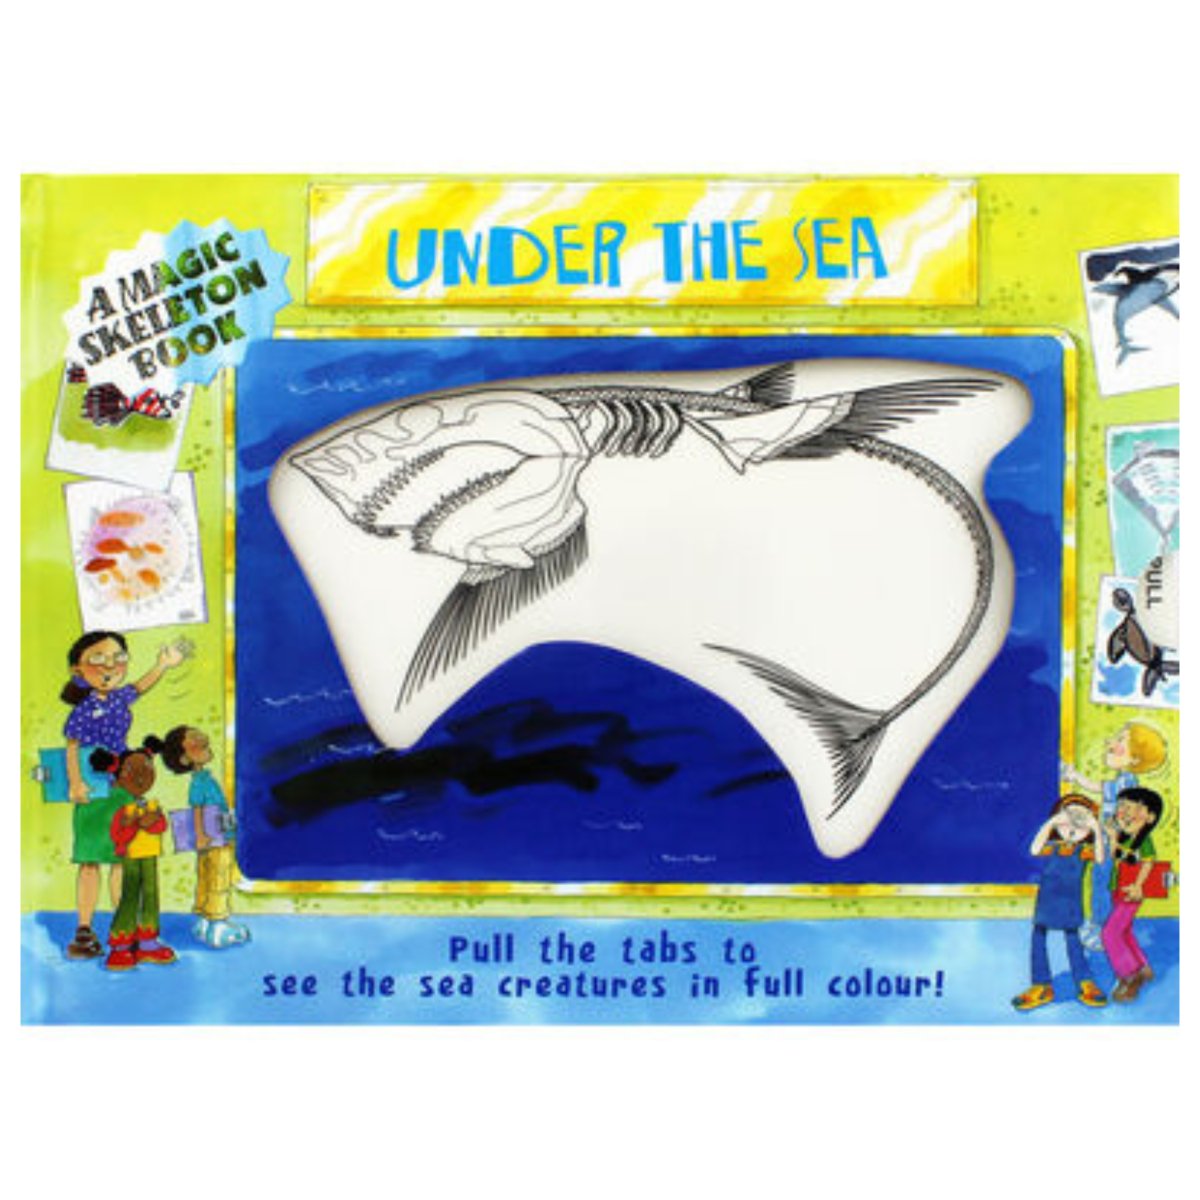 Under the Sea Magic Skeleton Book - Kids Party Craft